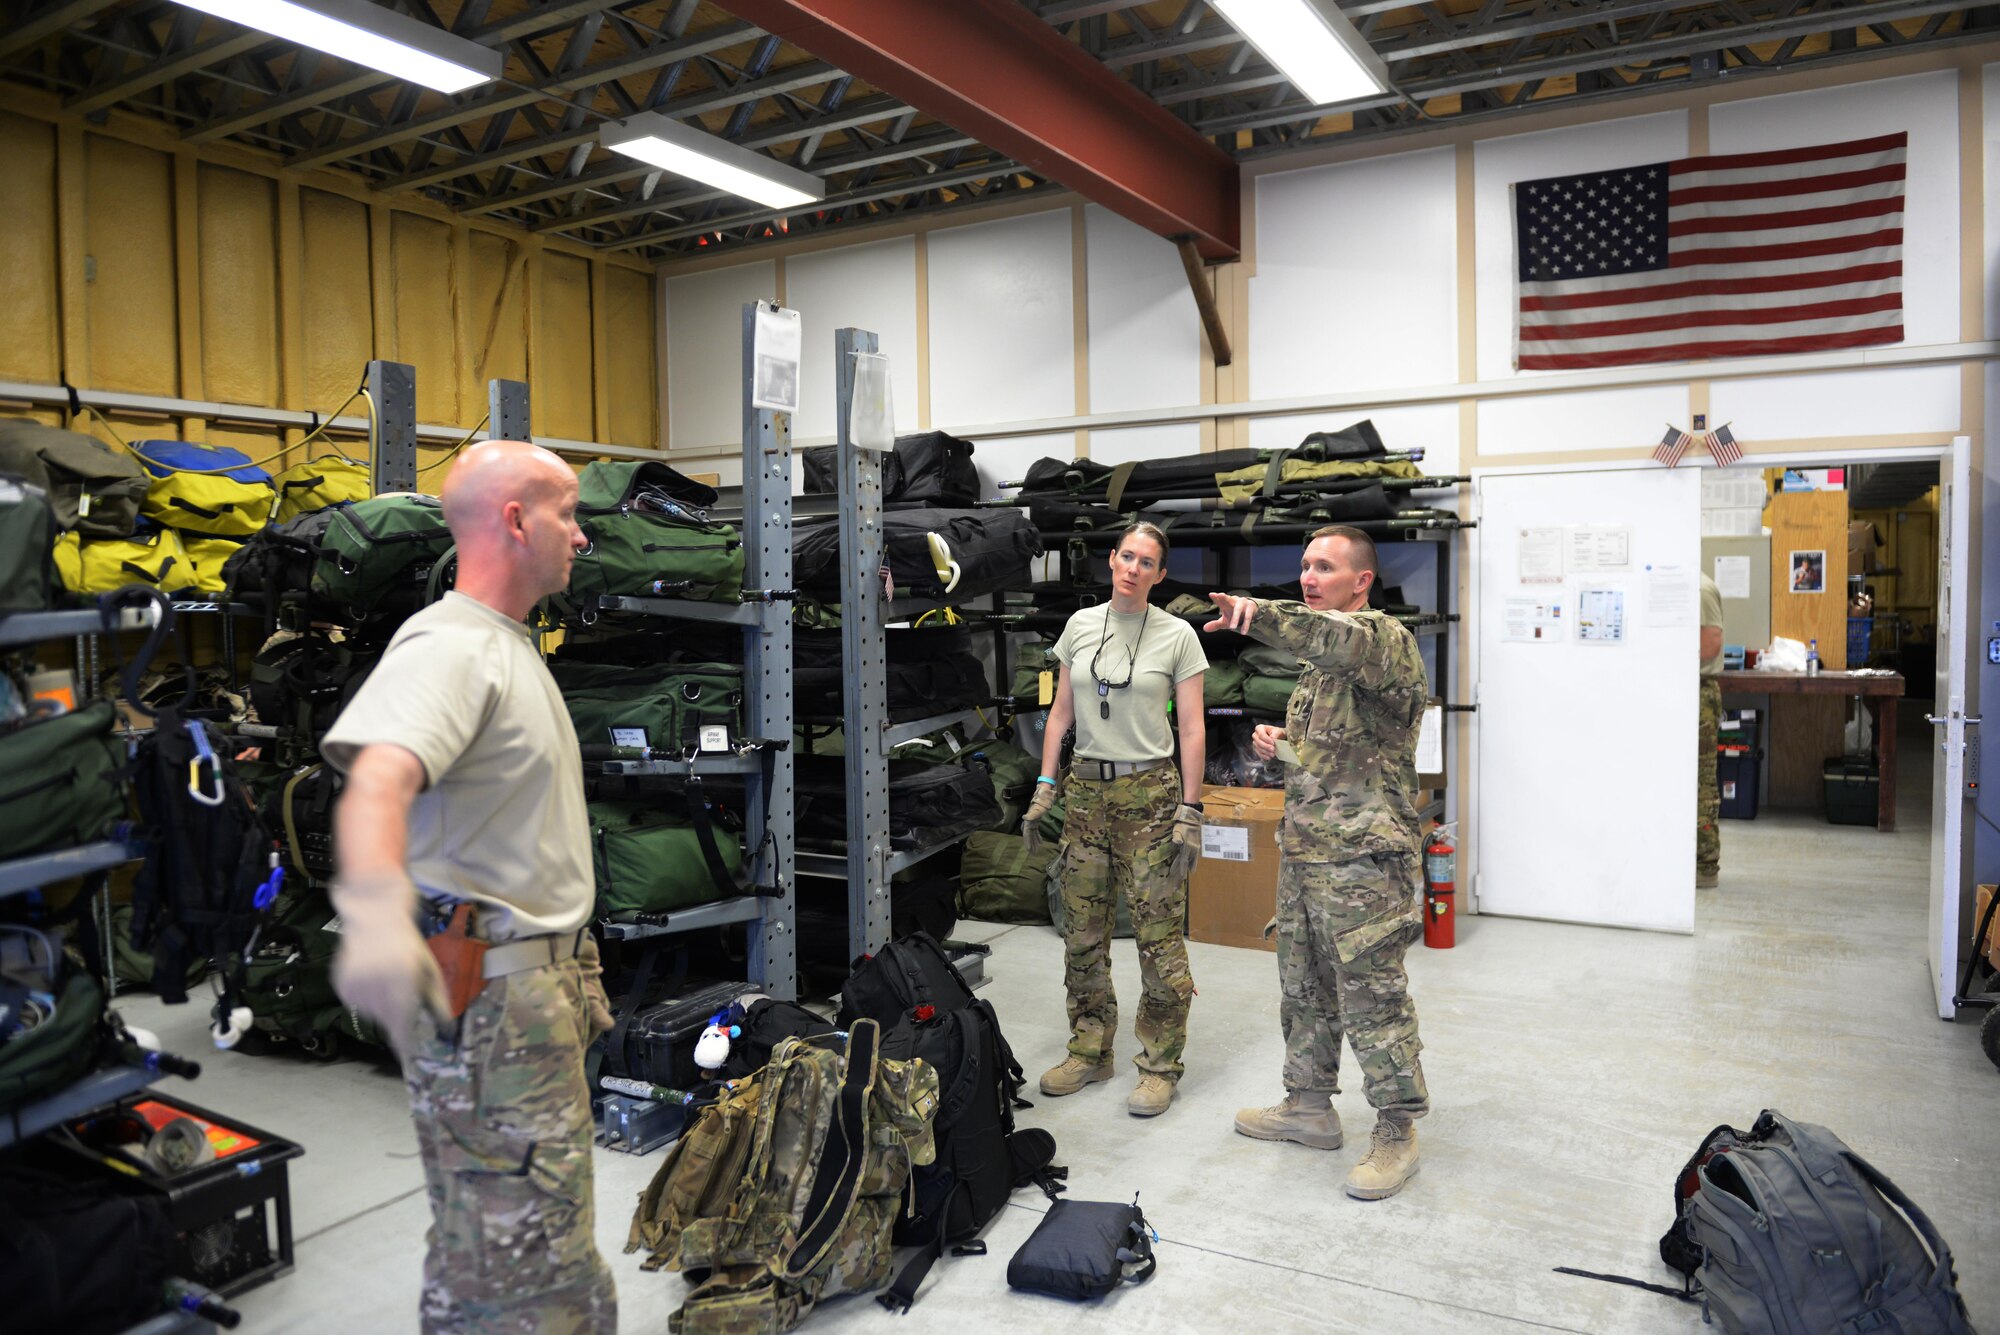 U.S. Air Force Senior Airman Margaret “Maggie” Mathewes, 455th Expeditionary Aeromedical Evacuation Squadron AE technician, and Lt. Col. David Bailey, right, 455th EAES chief nurse, and Chief Master Sgt. Bart Walters, 455th EAES superintendent, prepares equipment and supplies before an AE mission at Bagram Airfield, Afghanistan, Aug. 8, 2015.  The 455th EAES Airmen are charged with the responsibility of evacuating the sick and wounded from Central Command to higher echelons of medical care. (U.S. Air Force photo by Maj. Tony Wickman/Released)